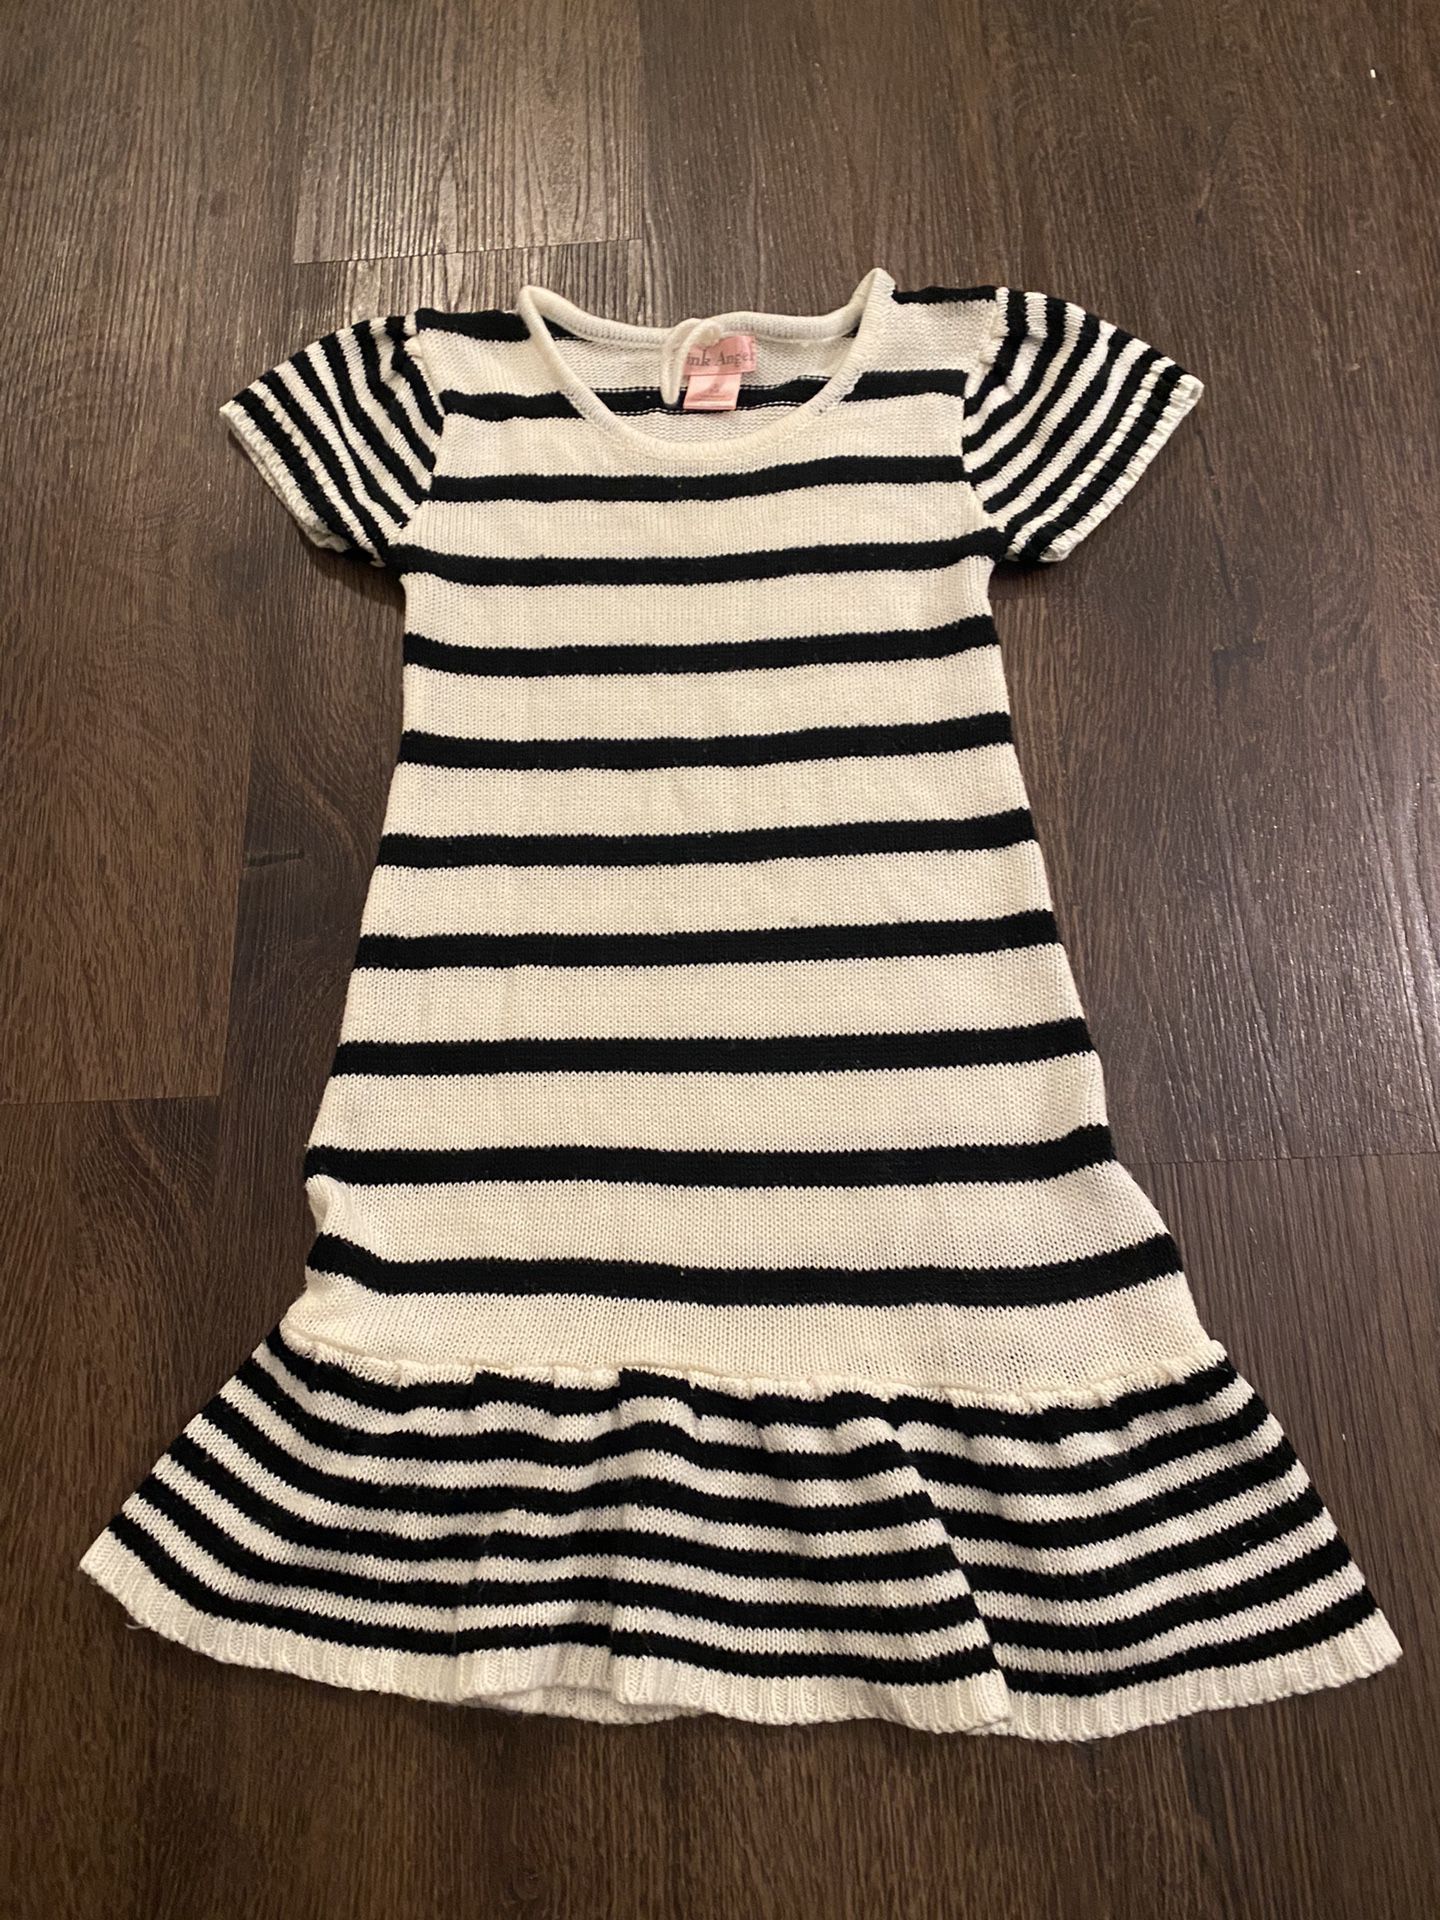 Girls Biege And Black Striped Sweater Dress Size 7/8 By Pink Angel #15